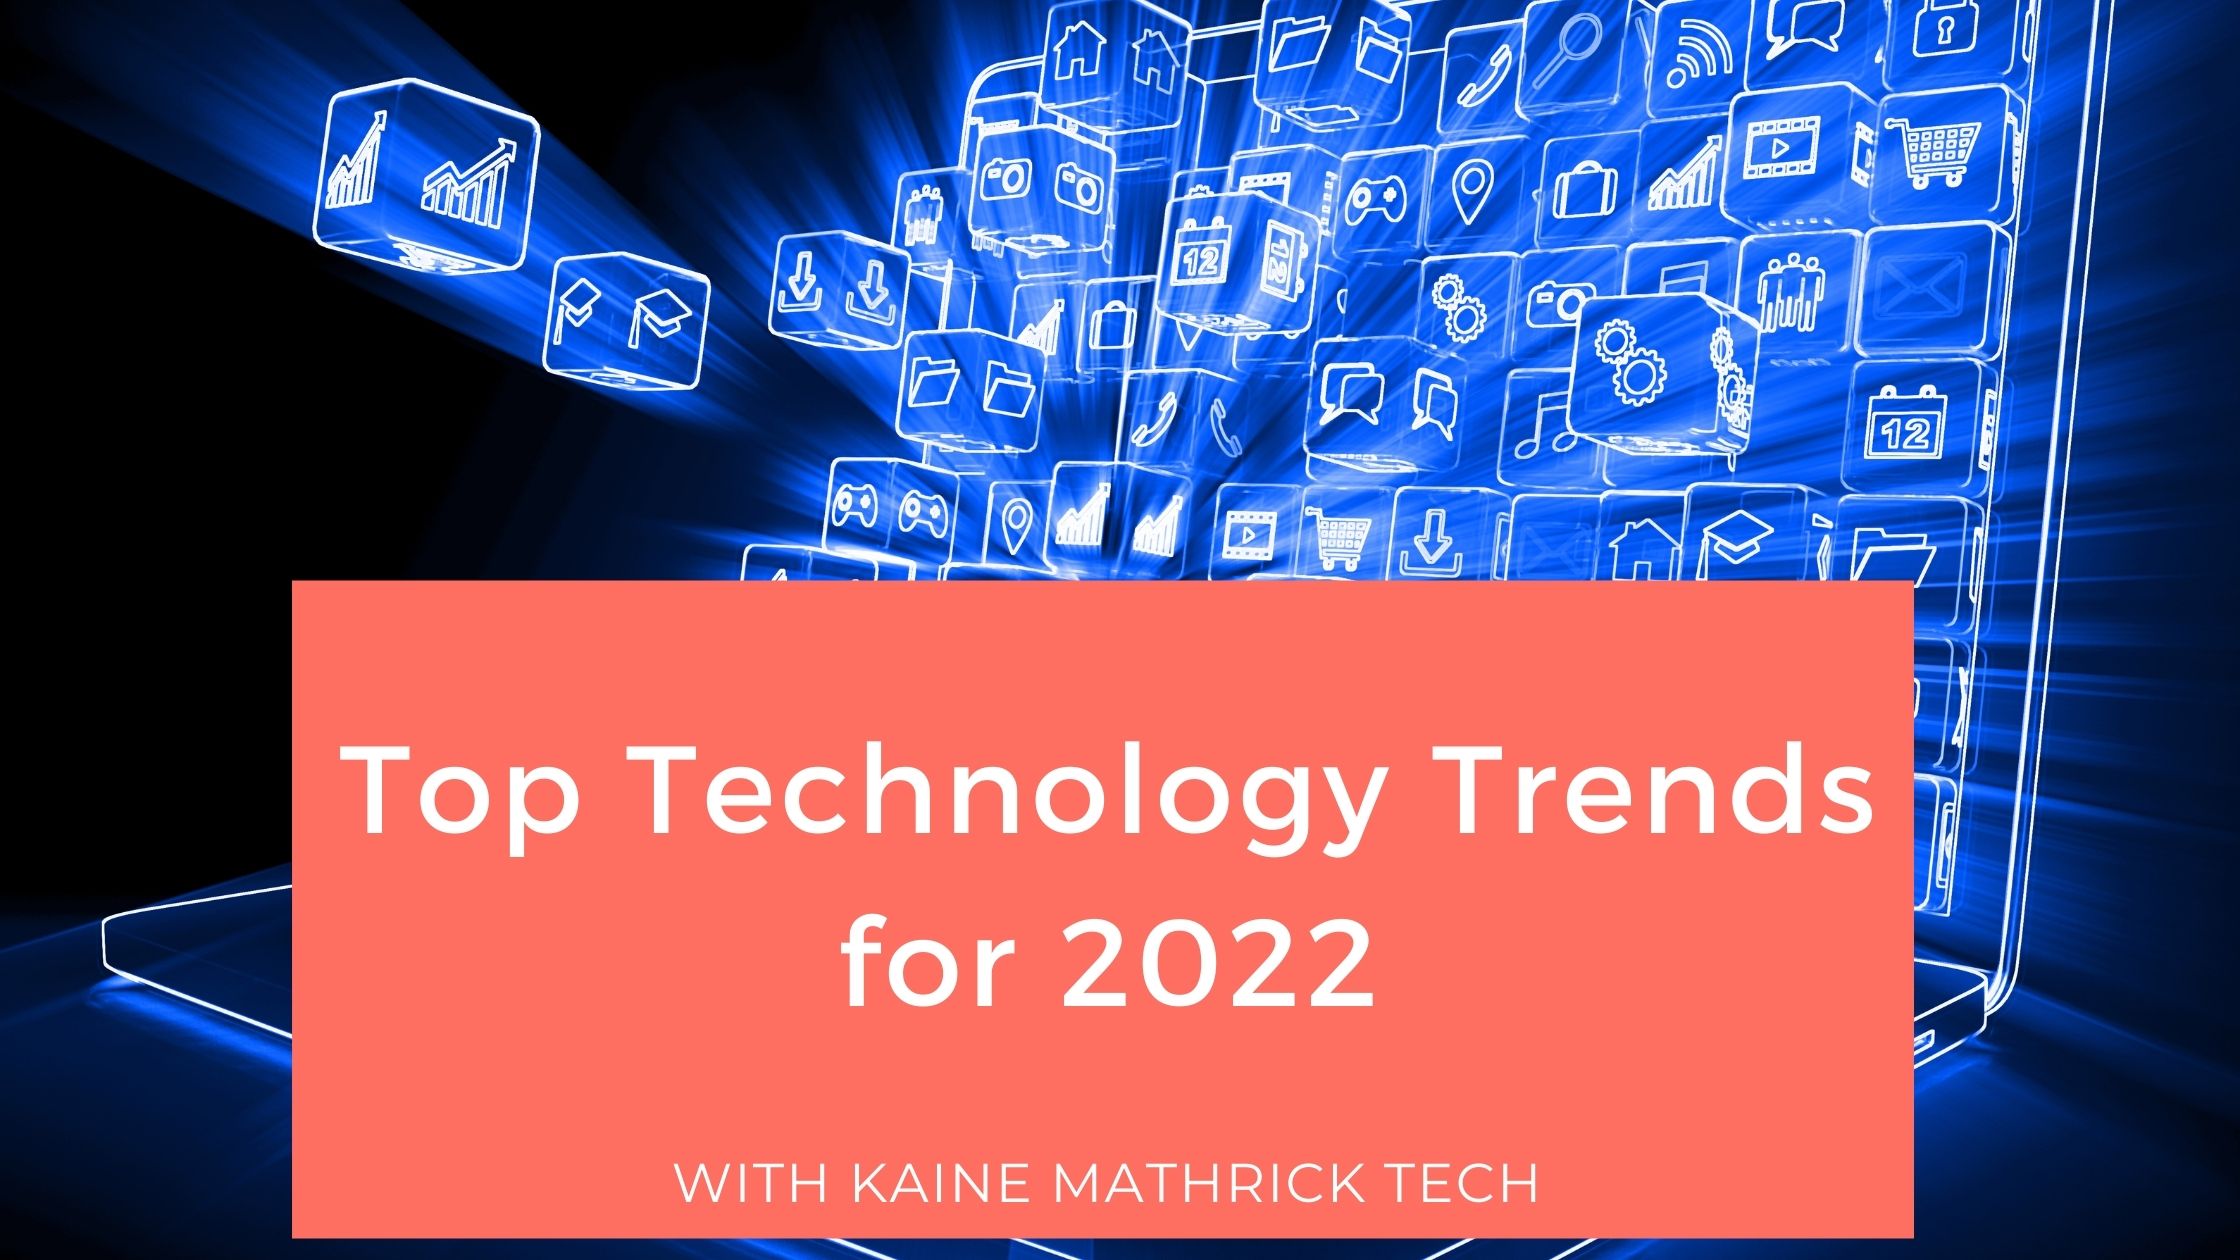 Top Technology Trends for 2022